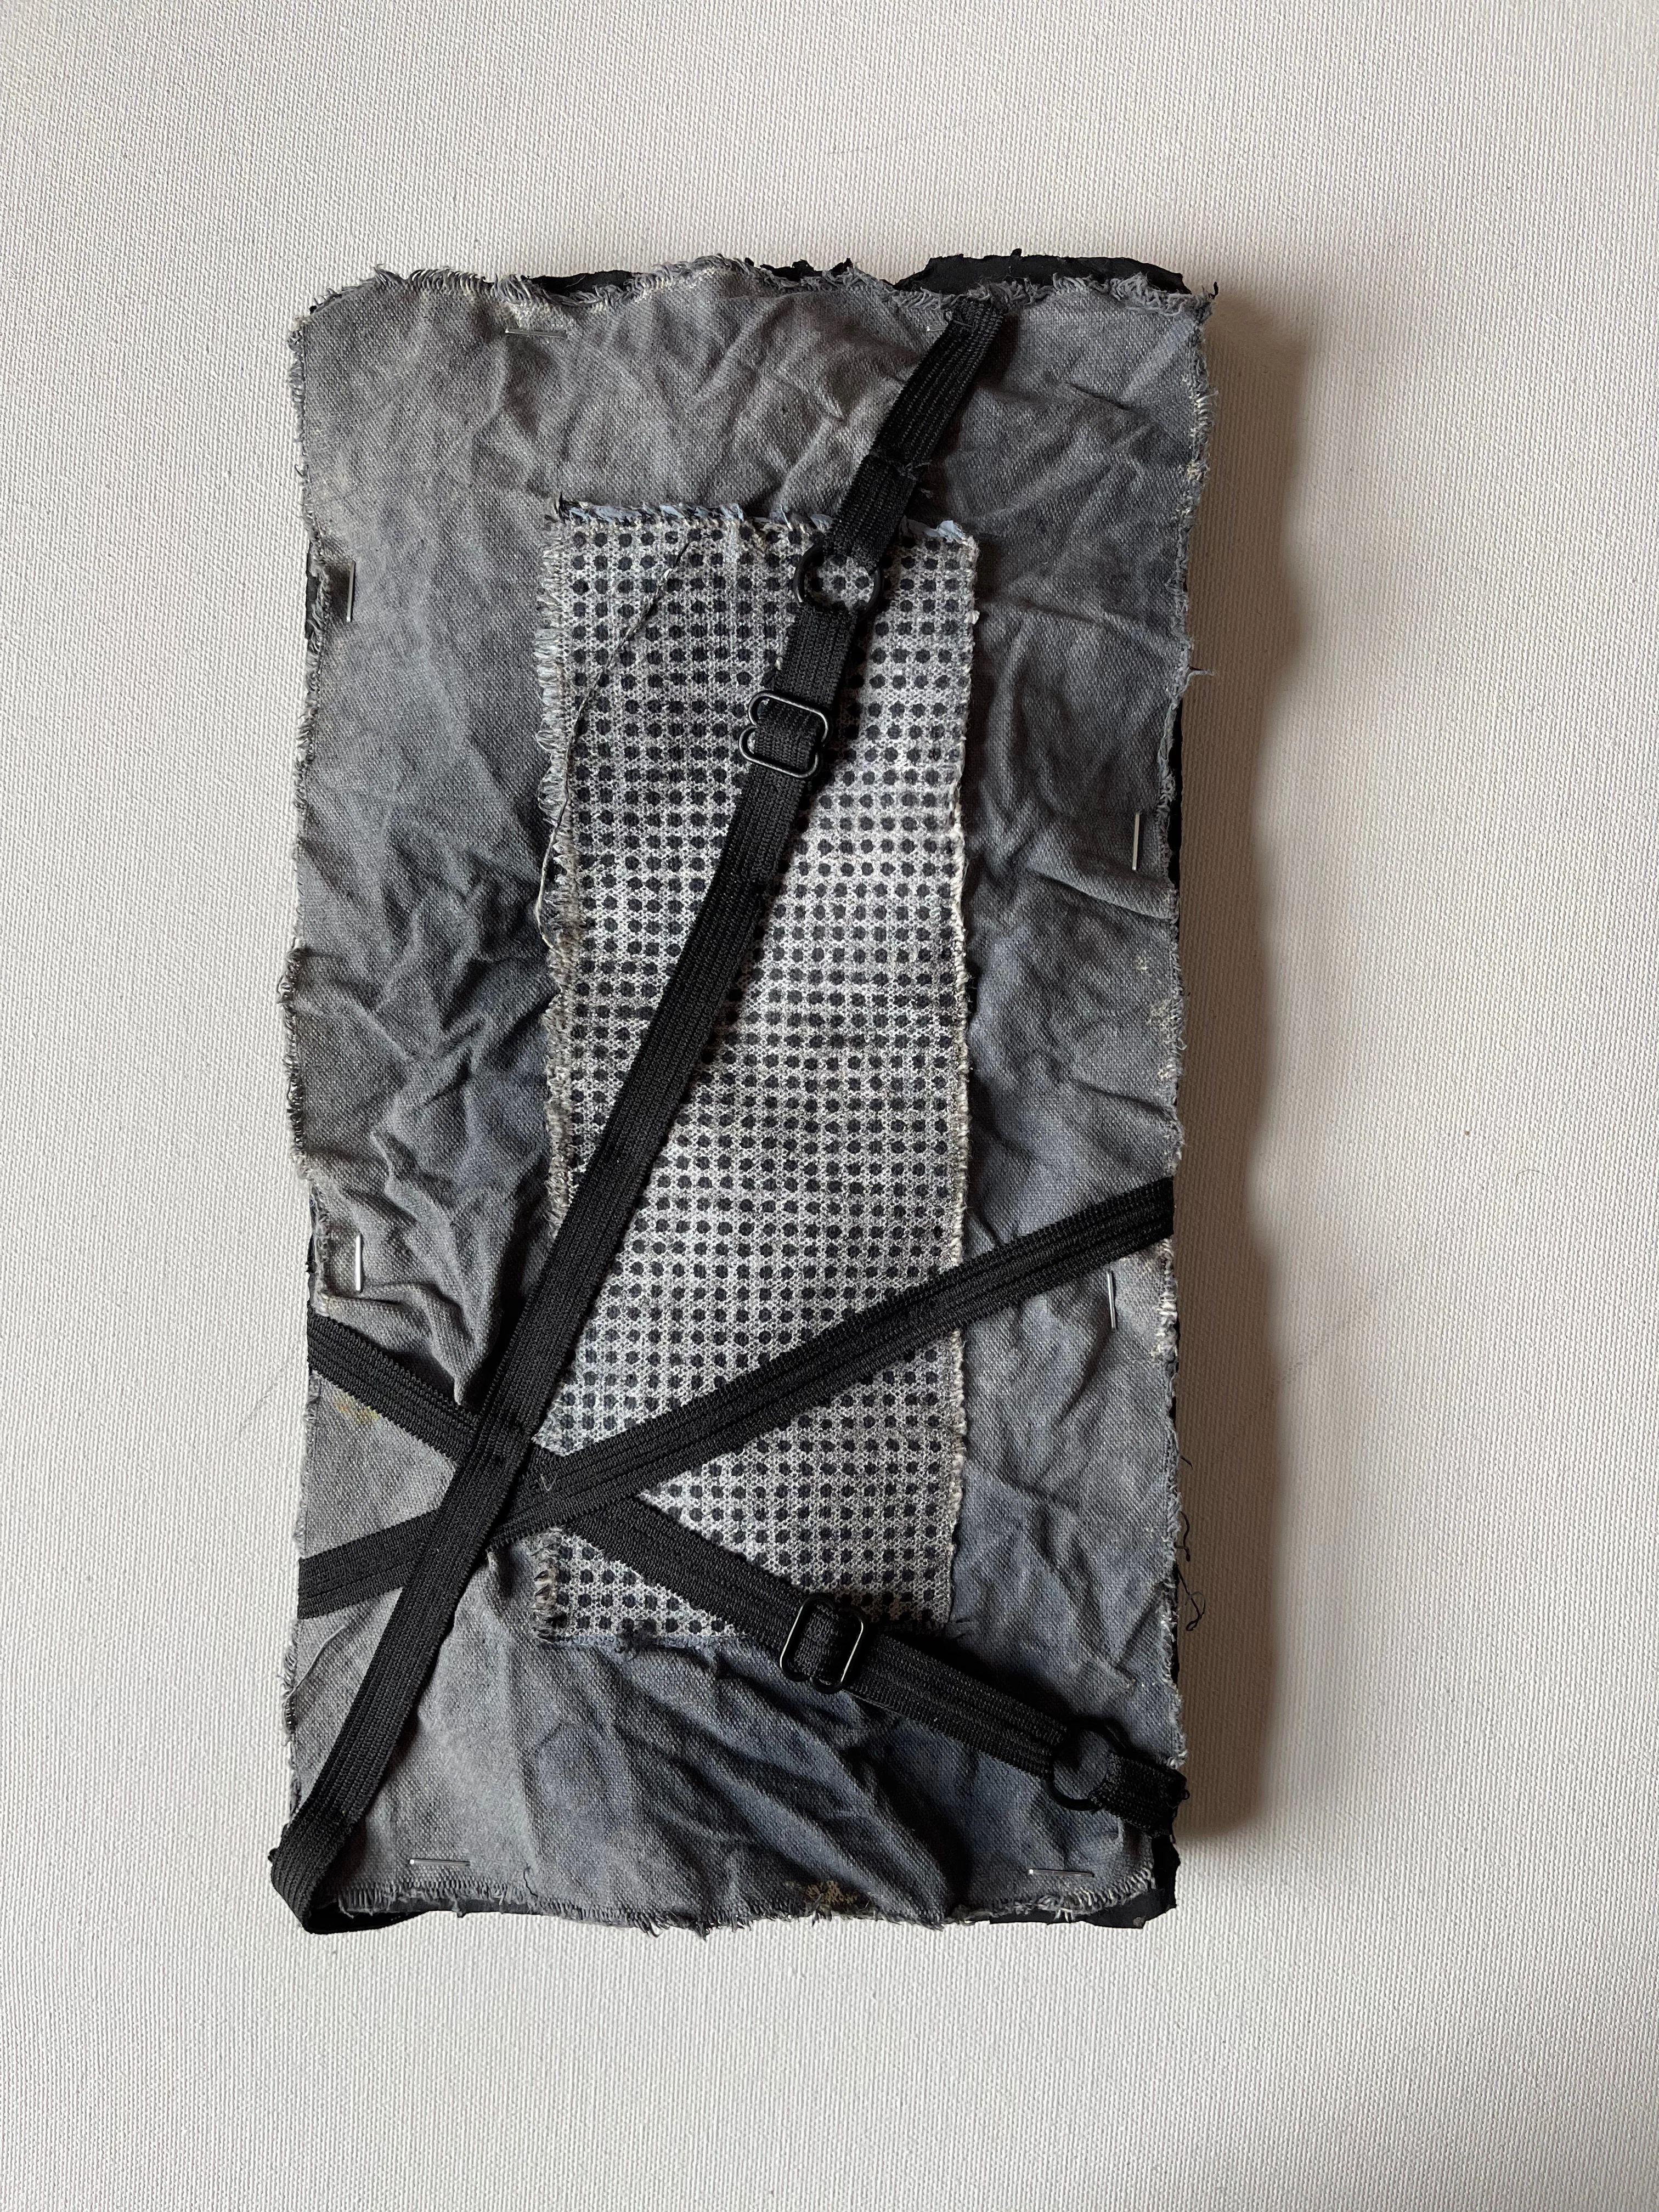 Untitled (wrapped) 